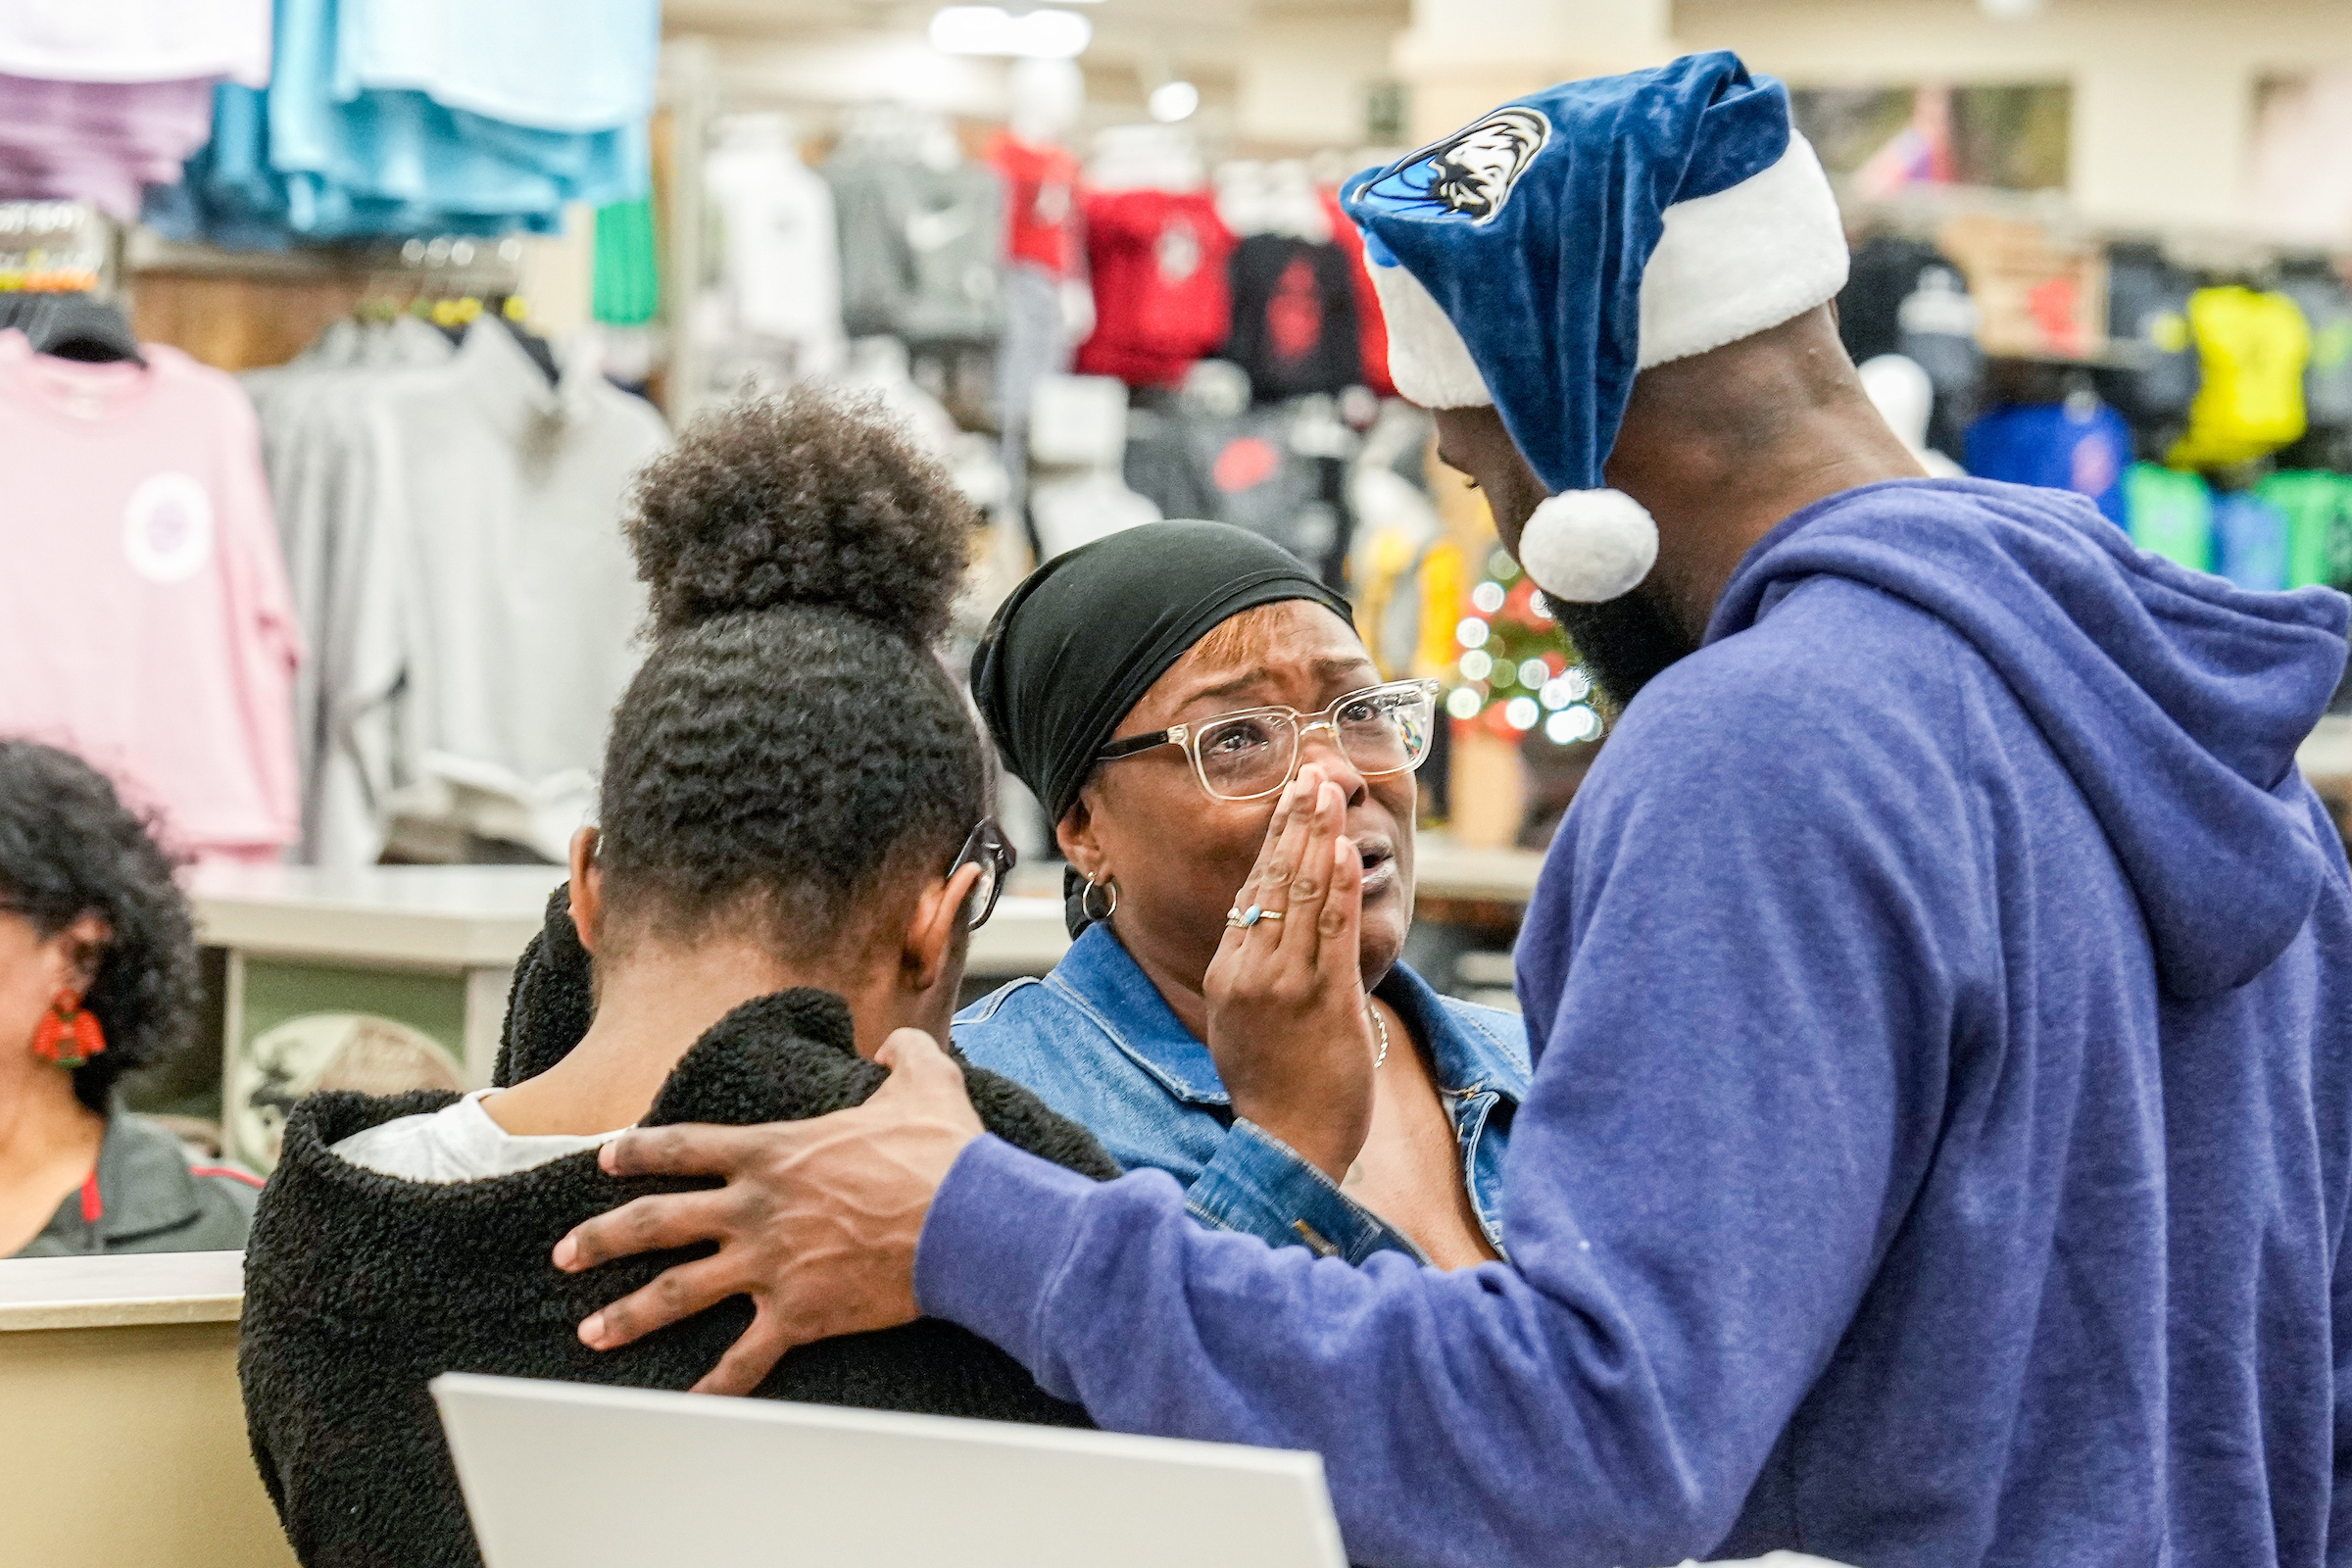 Four Dallas Mavs players surprise families with holiday shopping spree -  The Official Home of the Dallas Mavericks